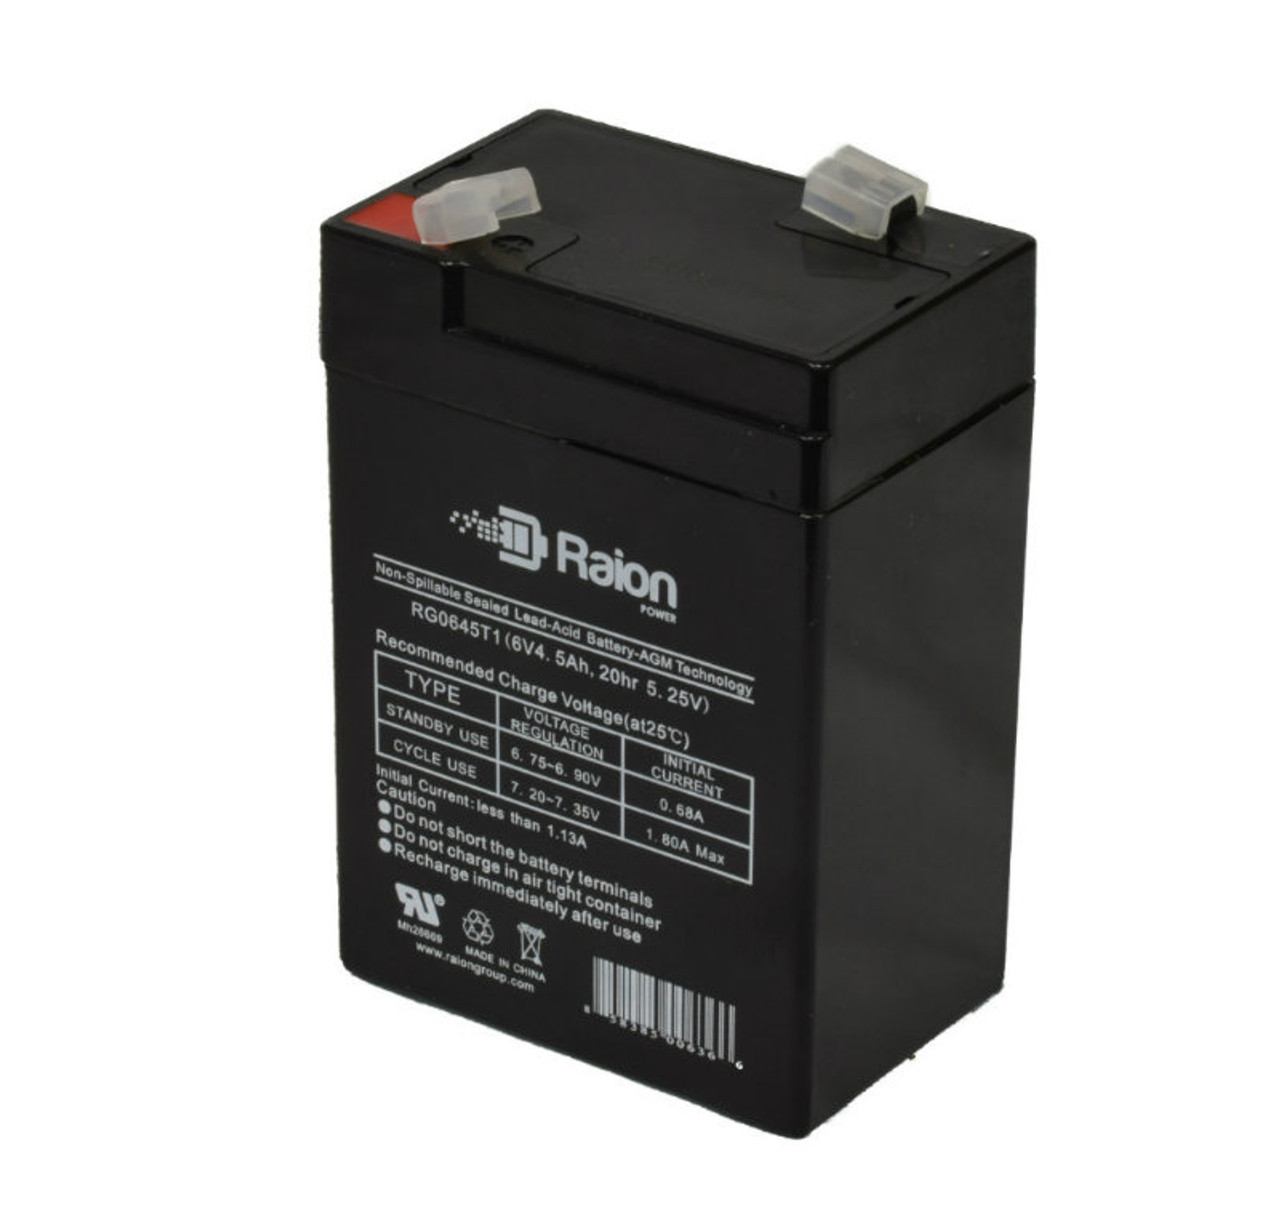 Raion Power RG0645T1 6V 4.5Ah Replacement Alarm Security System Battery for GE Security 60-602